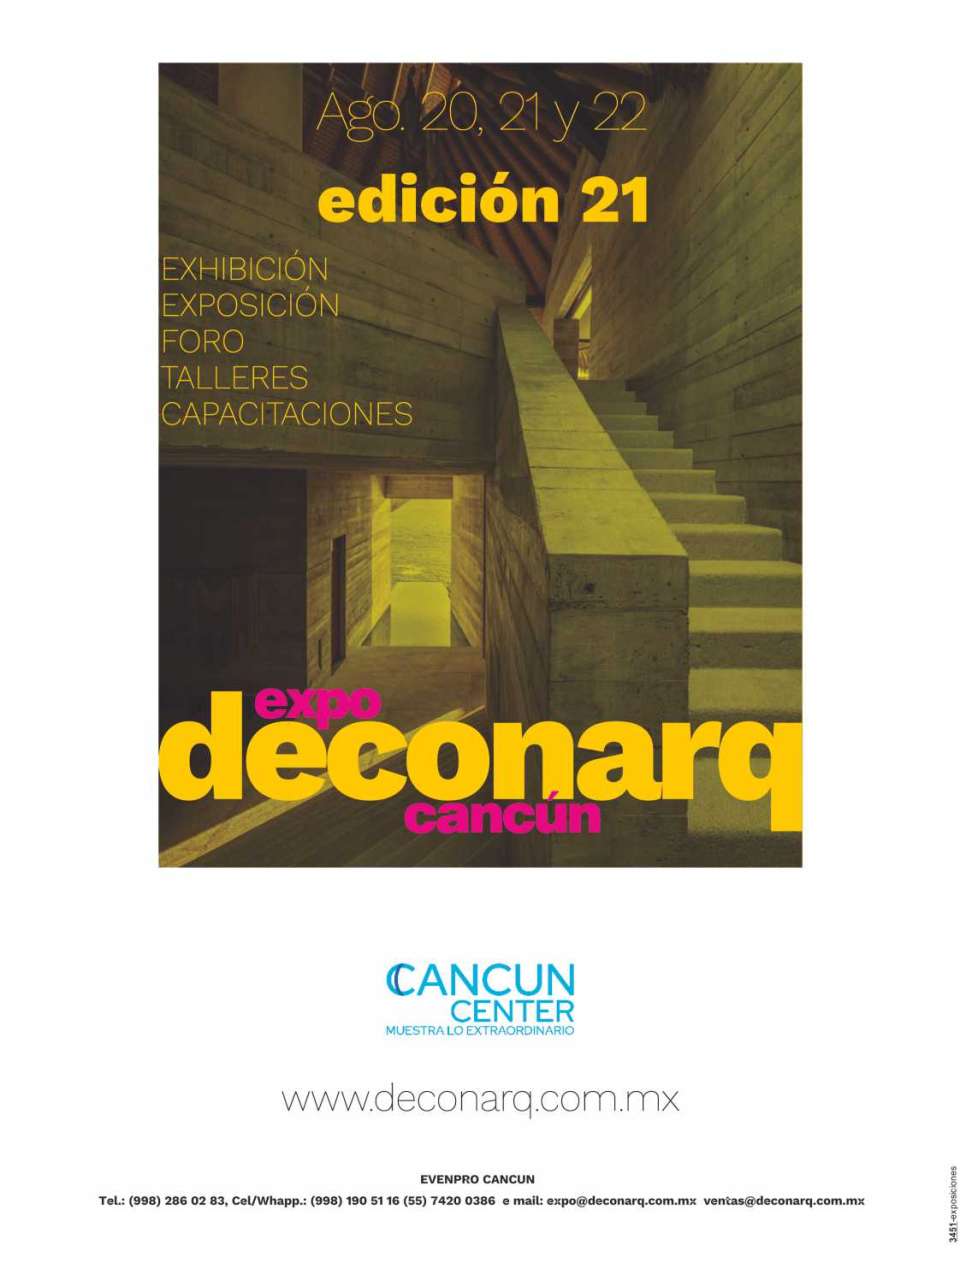 DECONARQ exhibition in Cancun from August 20 to 22, 2024. Development, Construction and Architecture.